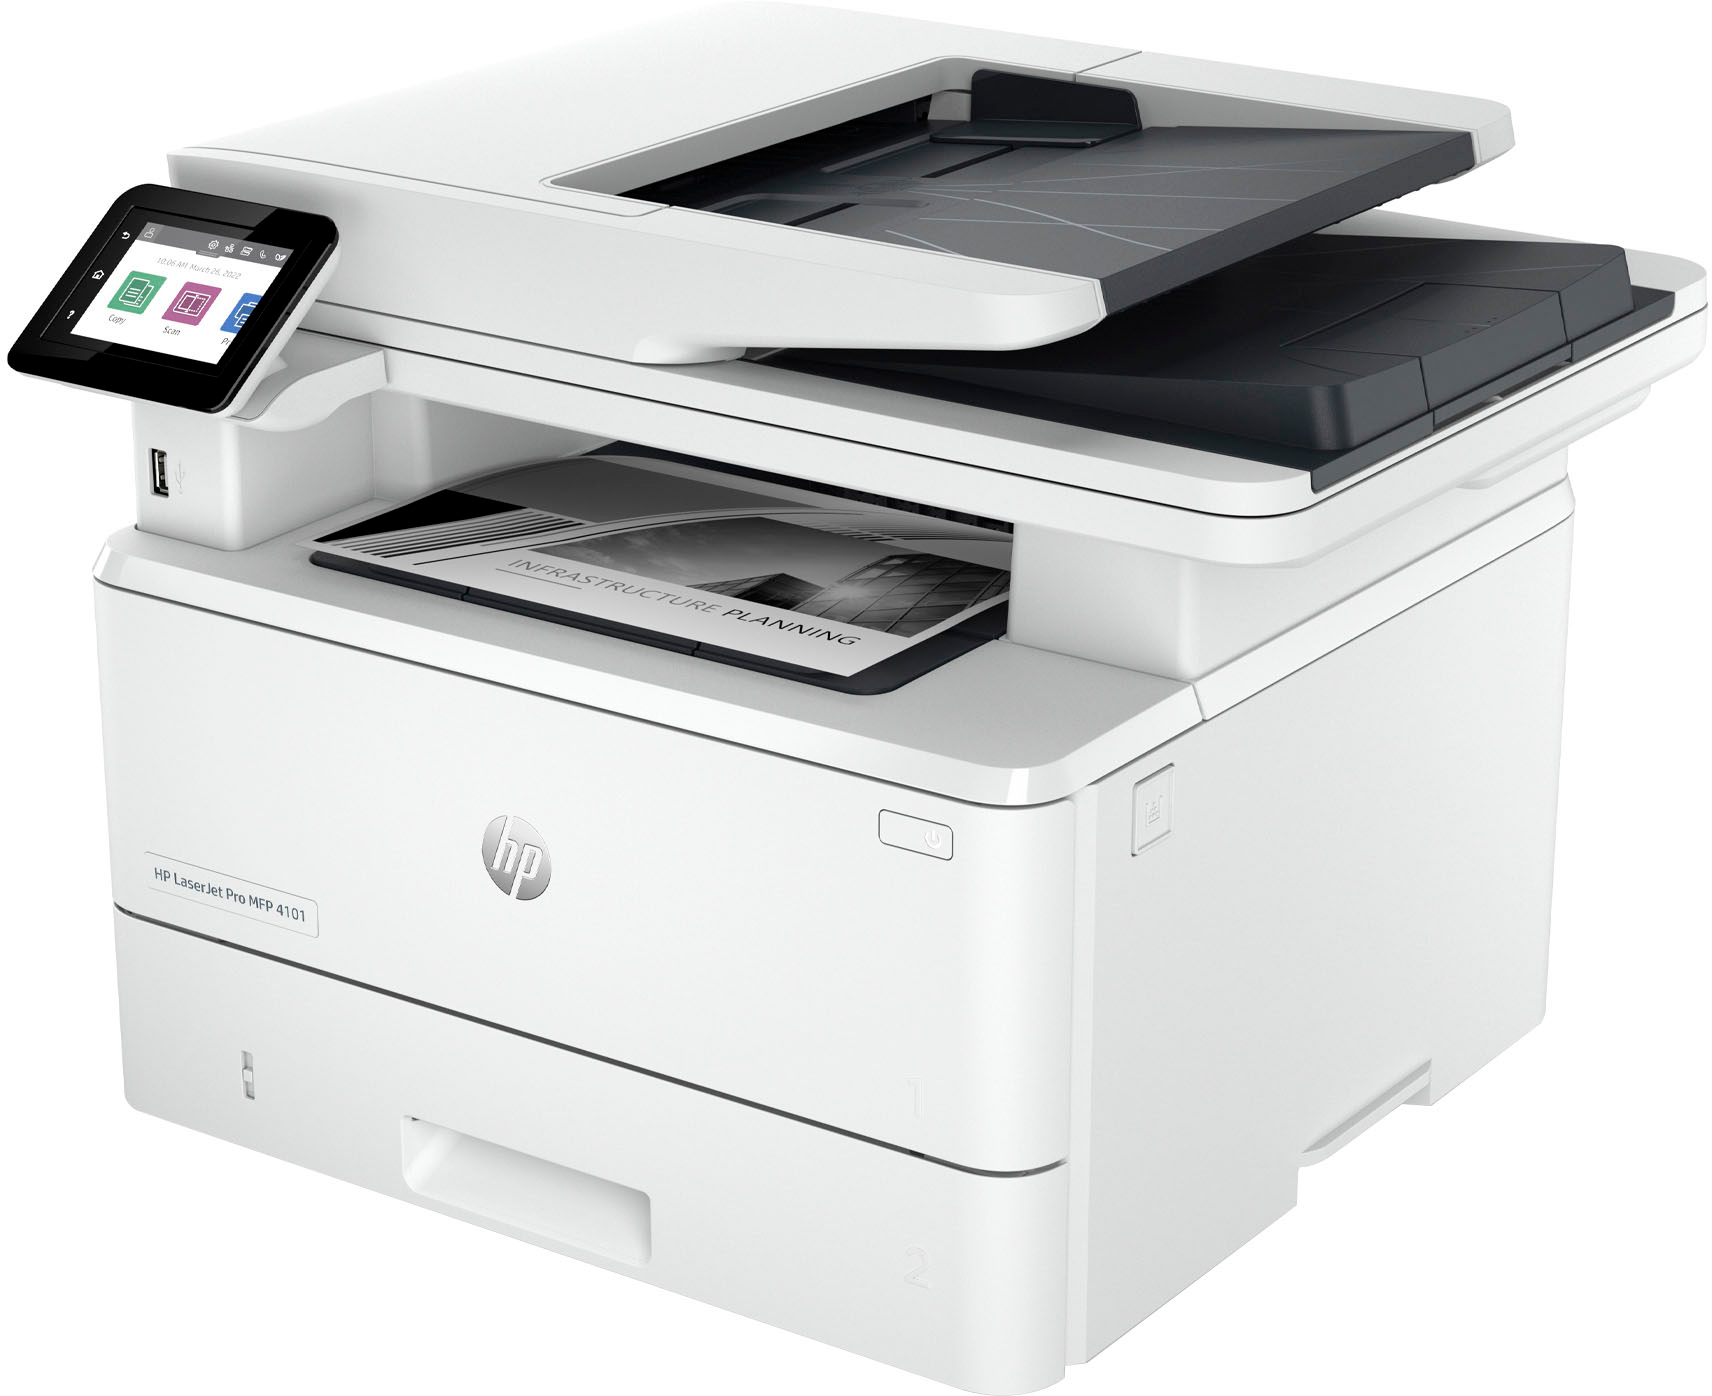 HP LaserJet Pro MFP 4101fdne All-In-One Black-and-White Laser Printer with 3 months of Instant Ink included with HP+ White LaserJet Pro MFP 4101fdne Best Buy